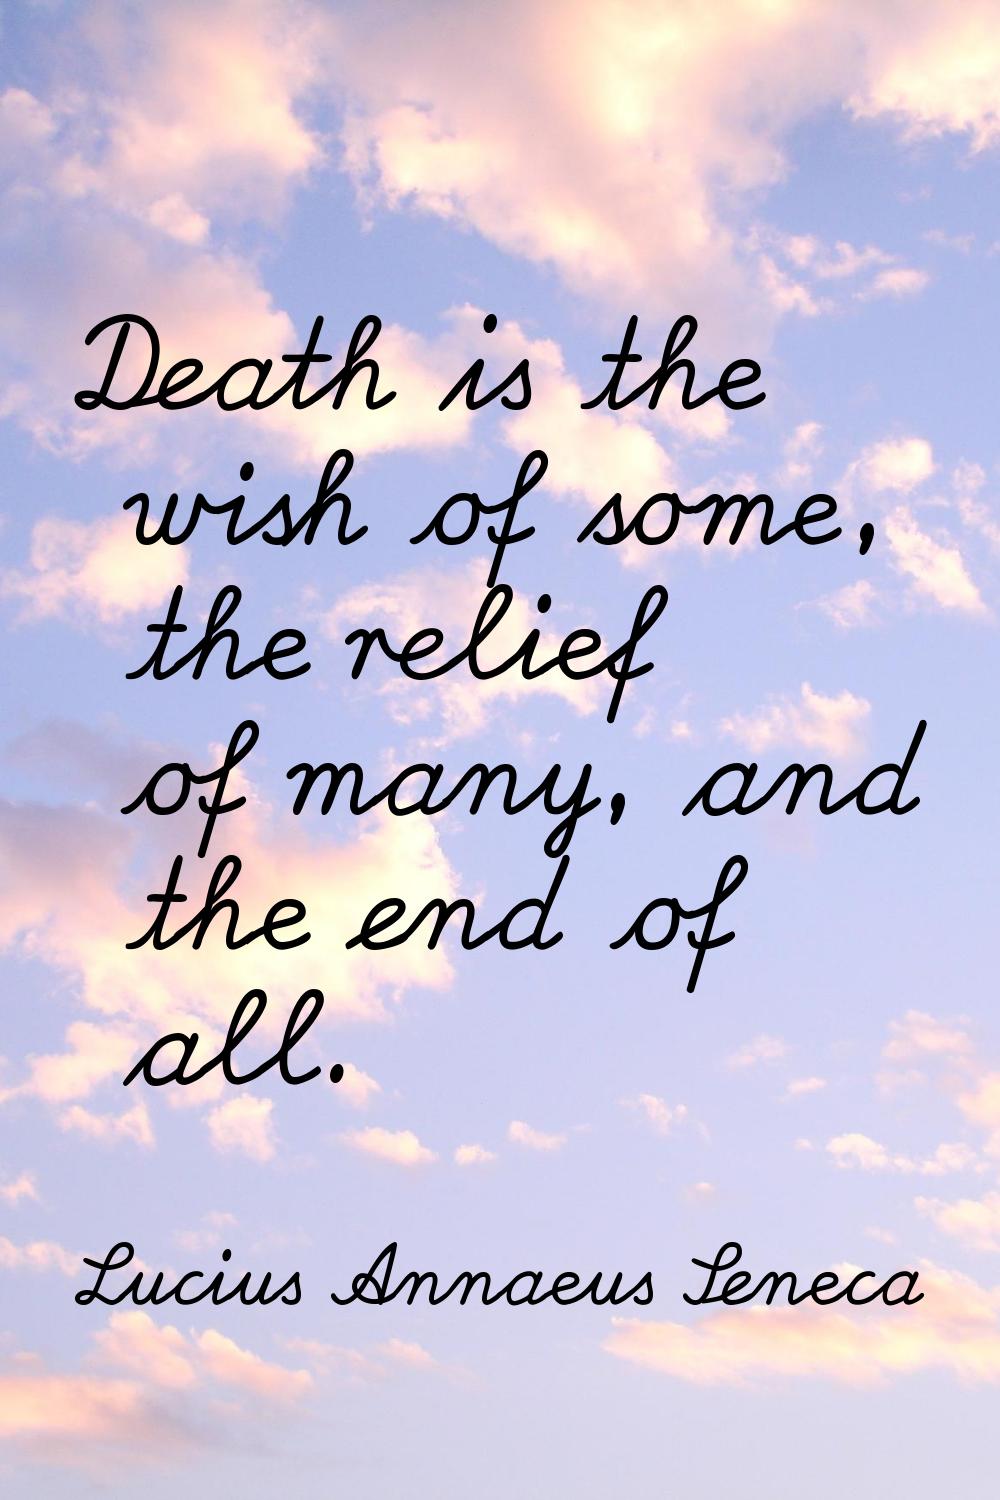 Death is the wish of some, the relief of many, and the end of all.